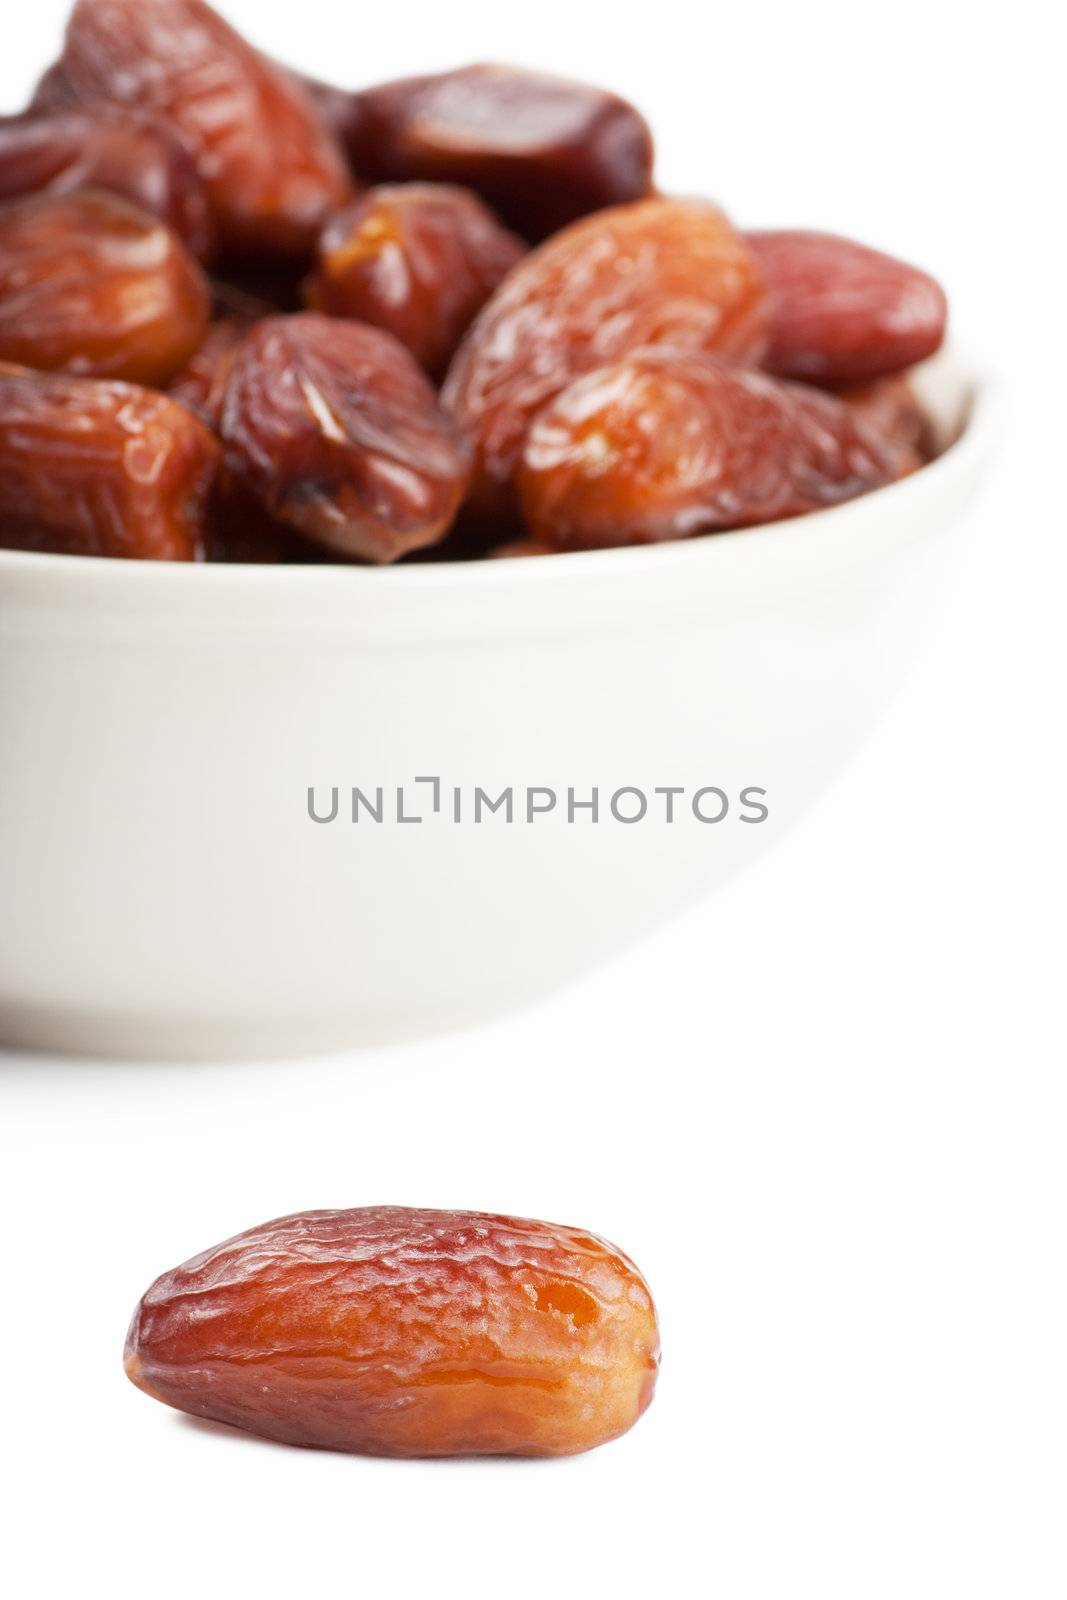 Dates in a bowl by AGorohov